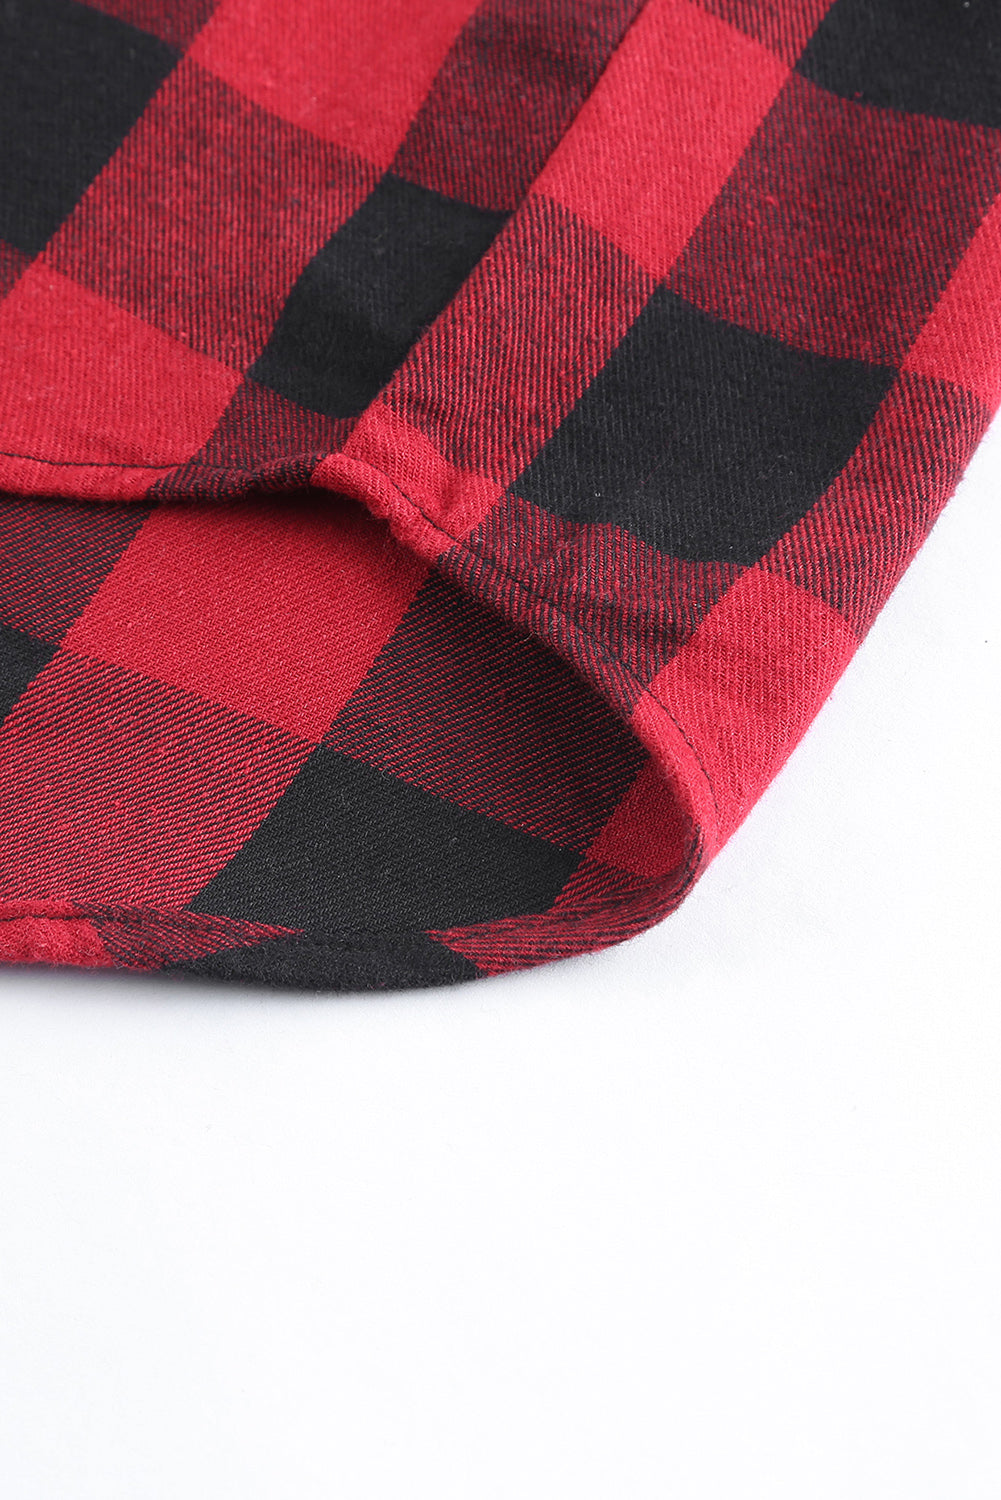 Fiery Red Plaid Printed Mens Hooded Shacket Men's Tops JT's Designer Fashion